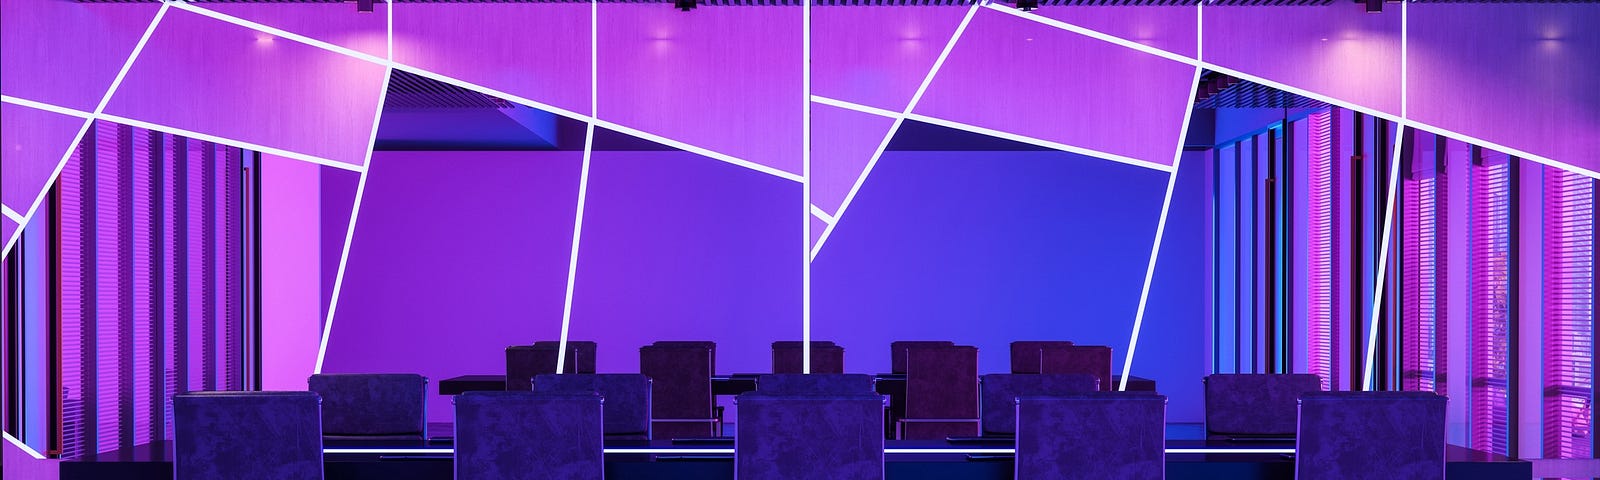 Cover image depicting a board room with empty seats all in shades of purple.